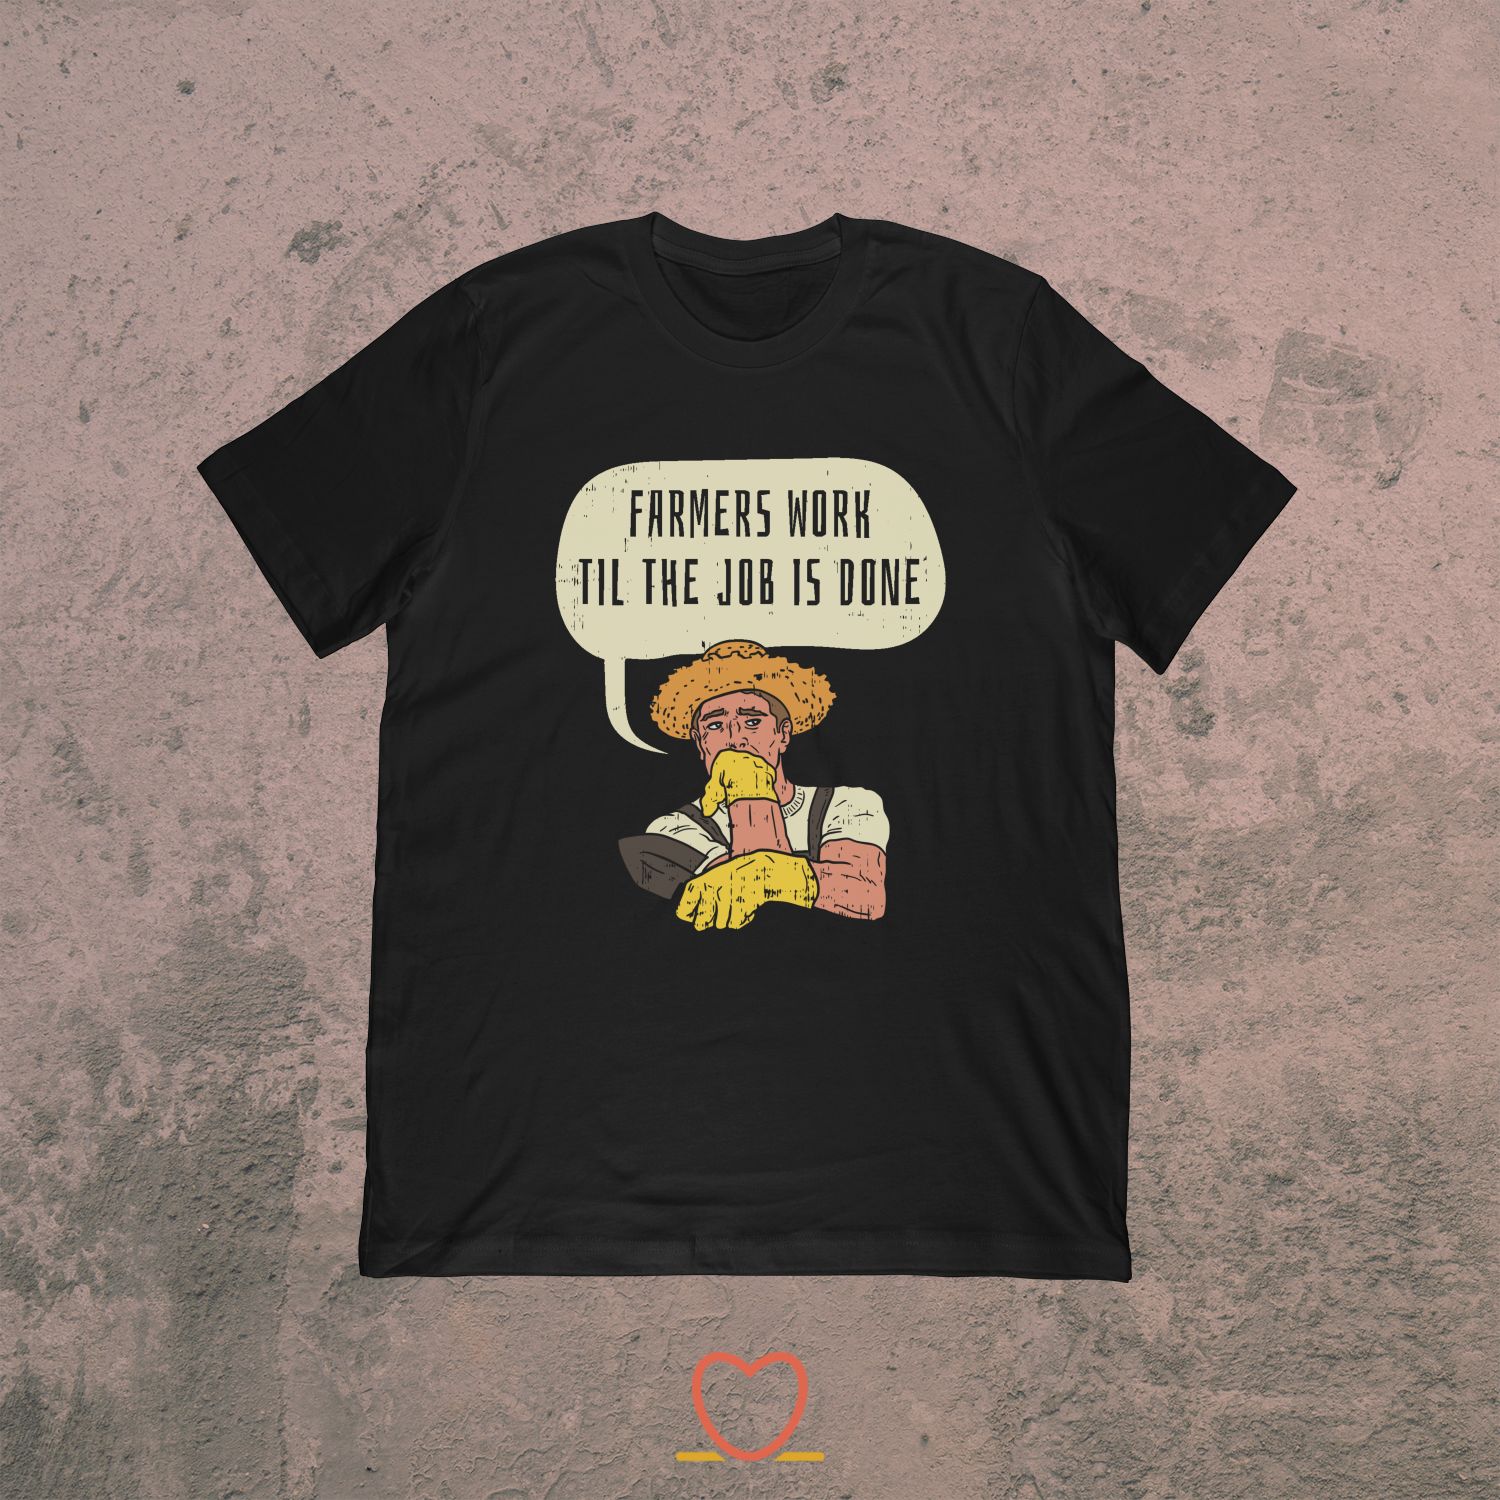 Farmers Work Til The Job Is Done – Funny Farming Tee